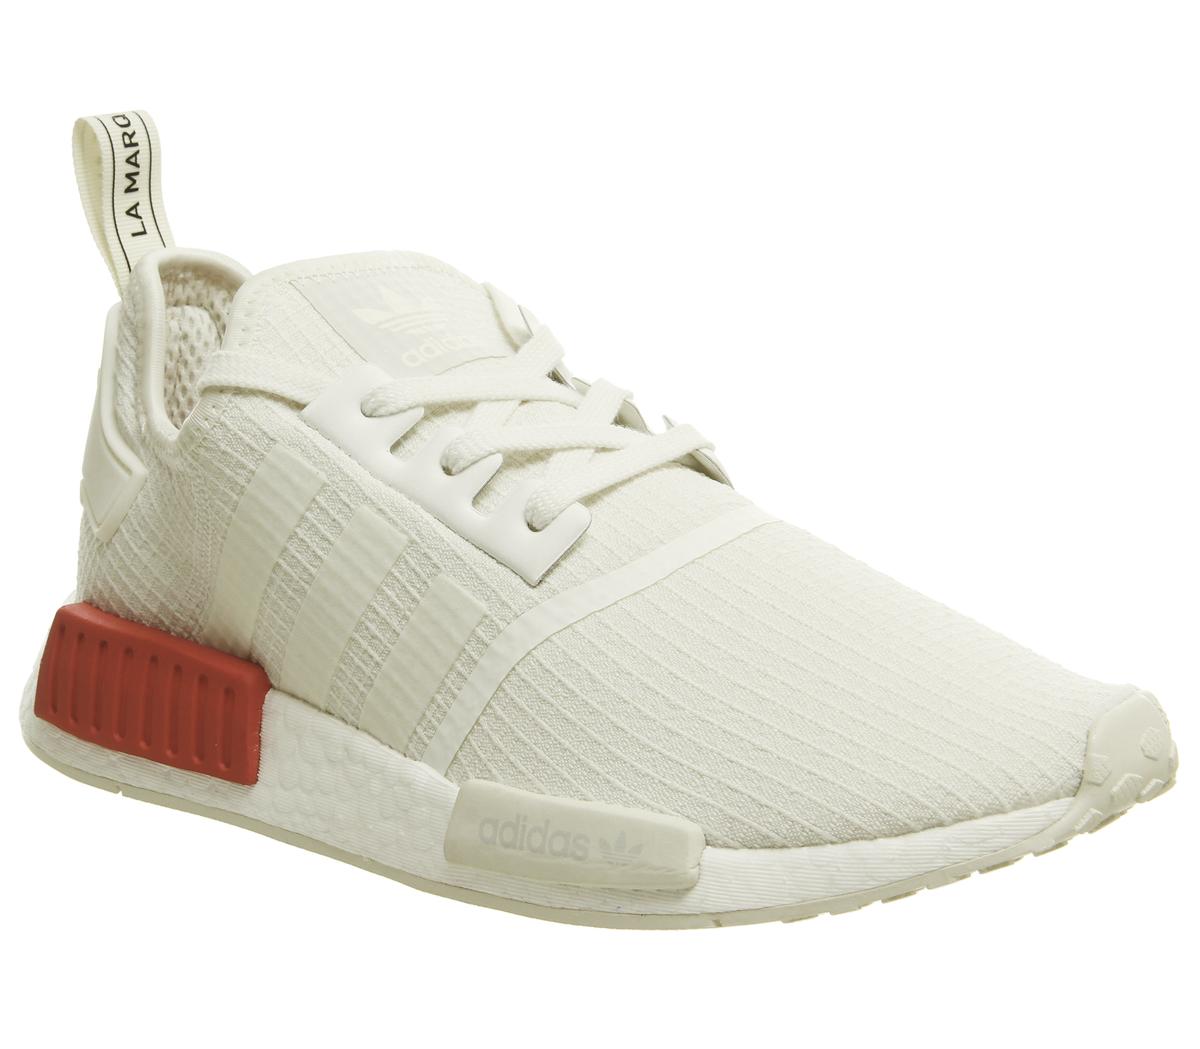 nmd r1 off white lush red